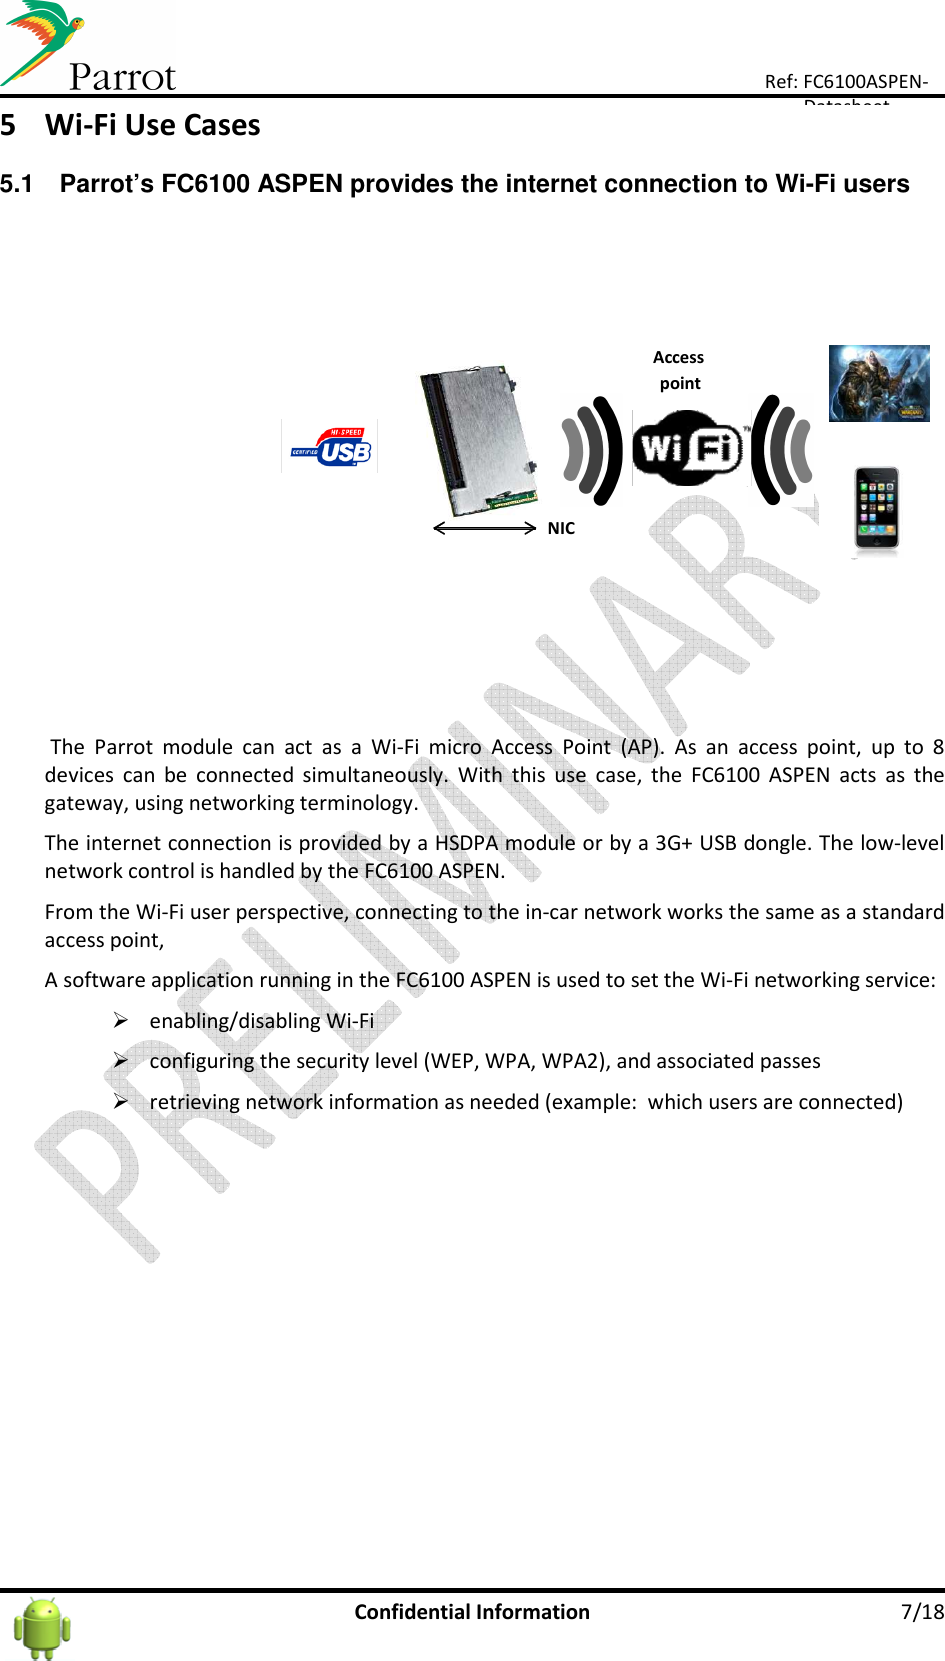      Confidential Information  7/18 Ref: FC6100ASPEN-Datasheet 5 Wi-Fi Use Cases  5.1  Parrot’s FC6100 ASPEN provides the internet connection to Wi-Fi users   The  Parrot  module  can  act  as  a  Wi-Fi  micro  Access  Point  (AP).  As  an  access  point,  up  to  8 devices  can  be  connected  simultaneously.  With  this  use  case,  the  FC6100  ASPEN  acts  as  the gateway, using networking terminology. The internet connection is provided by a HSDPA module or by a 3G+ USB dongle. The low-level network control is handled by the FC6100 ASPEN. From the Wi-Fi user perspective, connecting to the in-car network works the same as a standard access point,  A software application running in the FC6100 ASPEN is used to set the Wi-Fi networking service:   enabling/disabling Wi-Fi   configuring the security level (WEP, WPA, WPA2), and associated passes   retrieving network information as needed (example:  which users are connected)    Accesspoint/NIC 